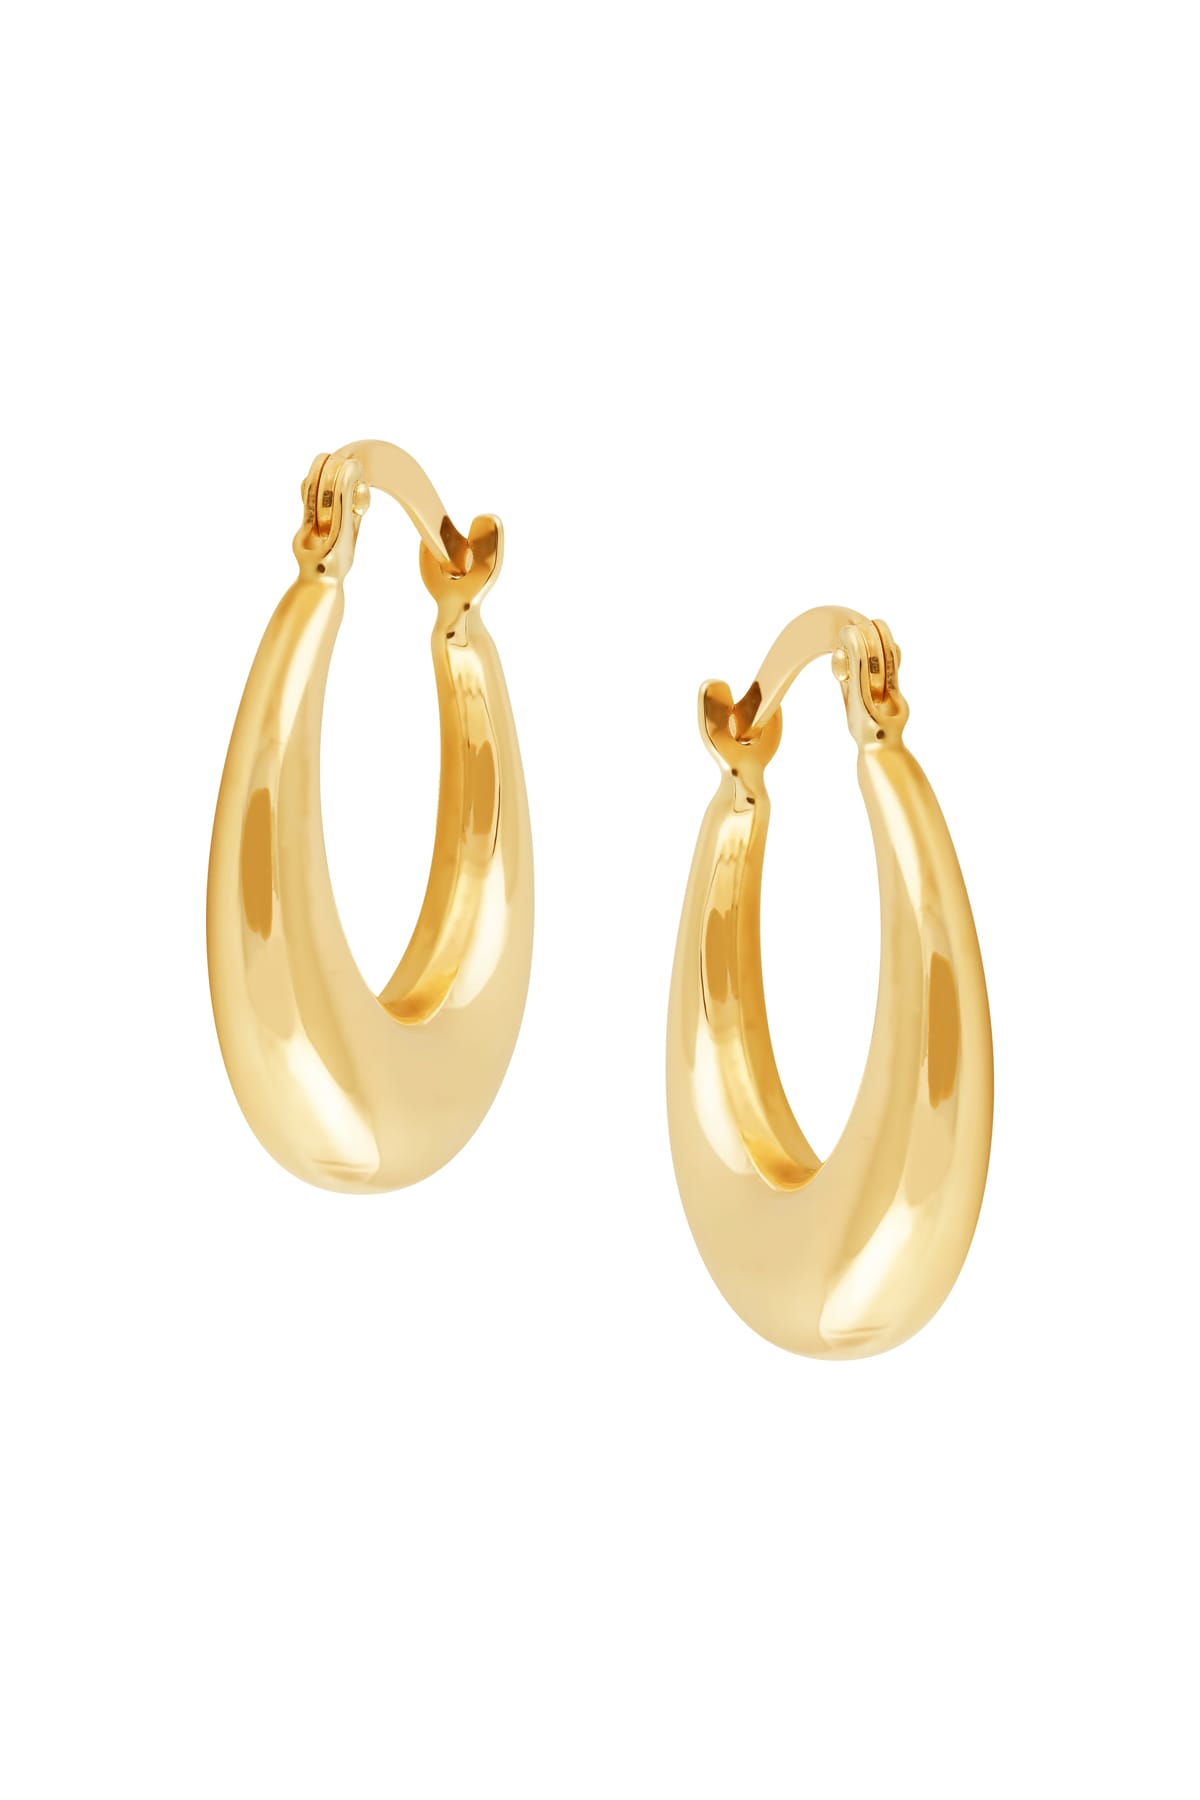 11.5mm Graduated Hoop Earrings In Yellow Gold from LeGassick.